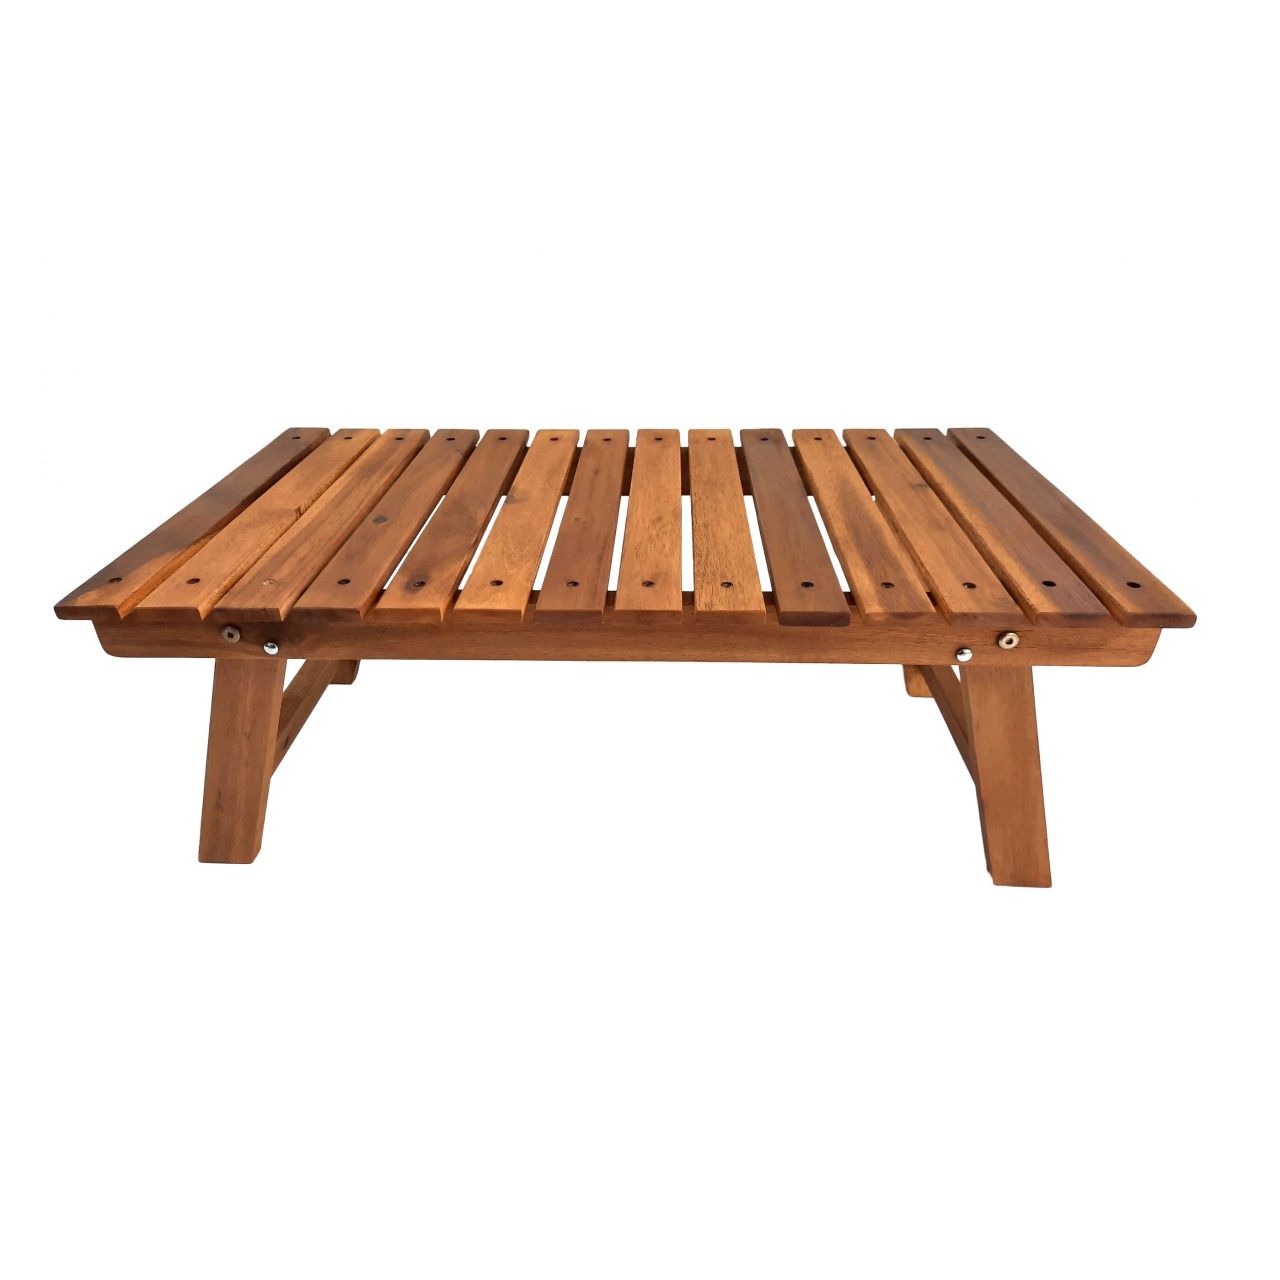 181812 - Relax Table Acacia Wood with Fabric Natural Colour